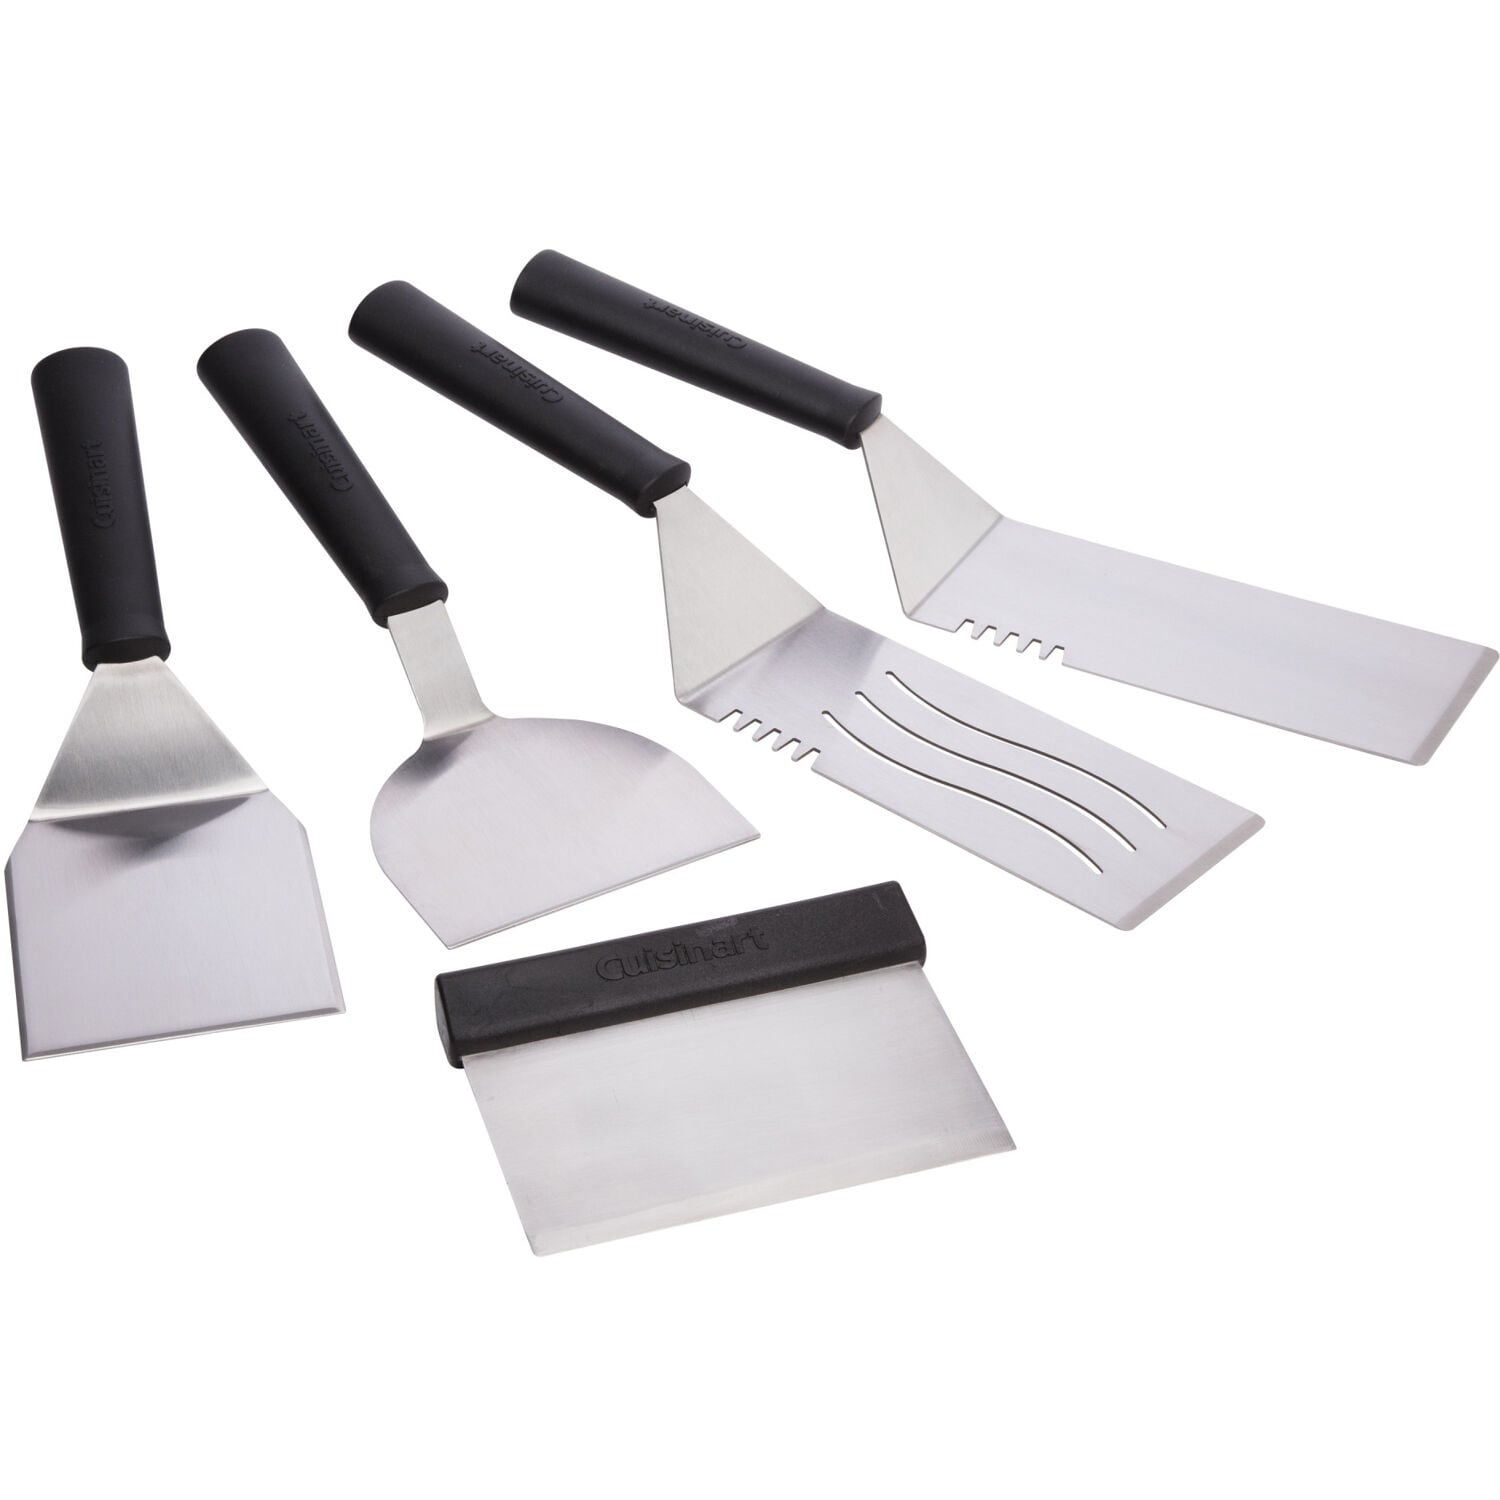 https://ak1.ostkcdn.com/images/products/is/images/direct/bbb853e18c2e3039a245339b7b6abdd55058f4bd/Cuisinart-5-Piece-Grill-and-Griddle-Spatula-Set.jpg